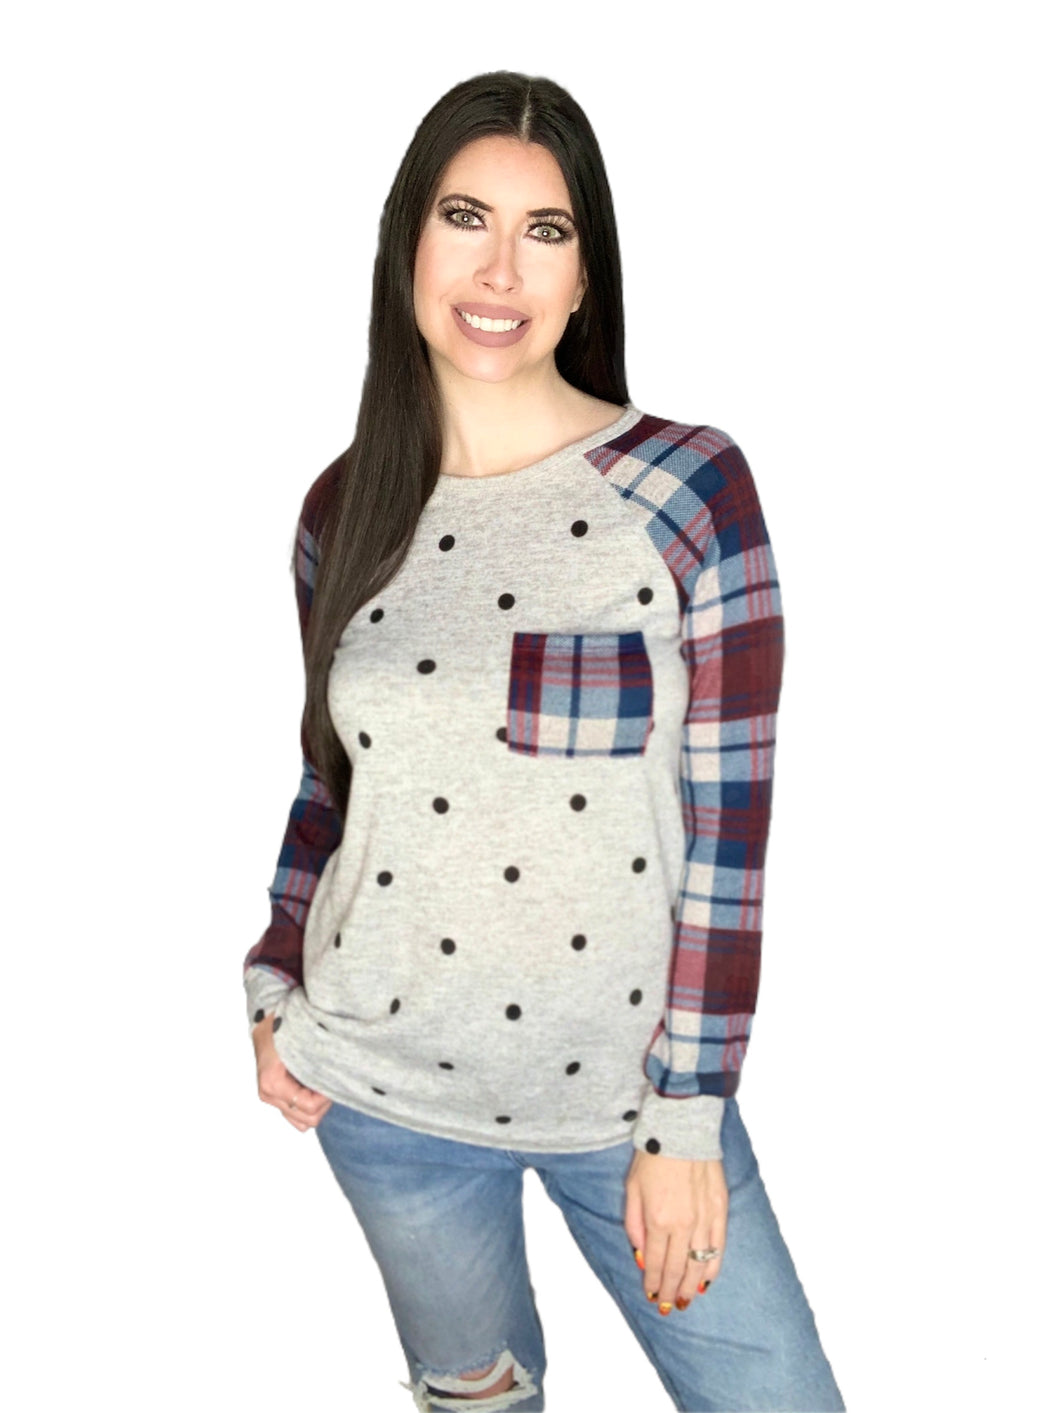 Best Of Times Top - Plaid & Polka Dots